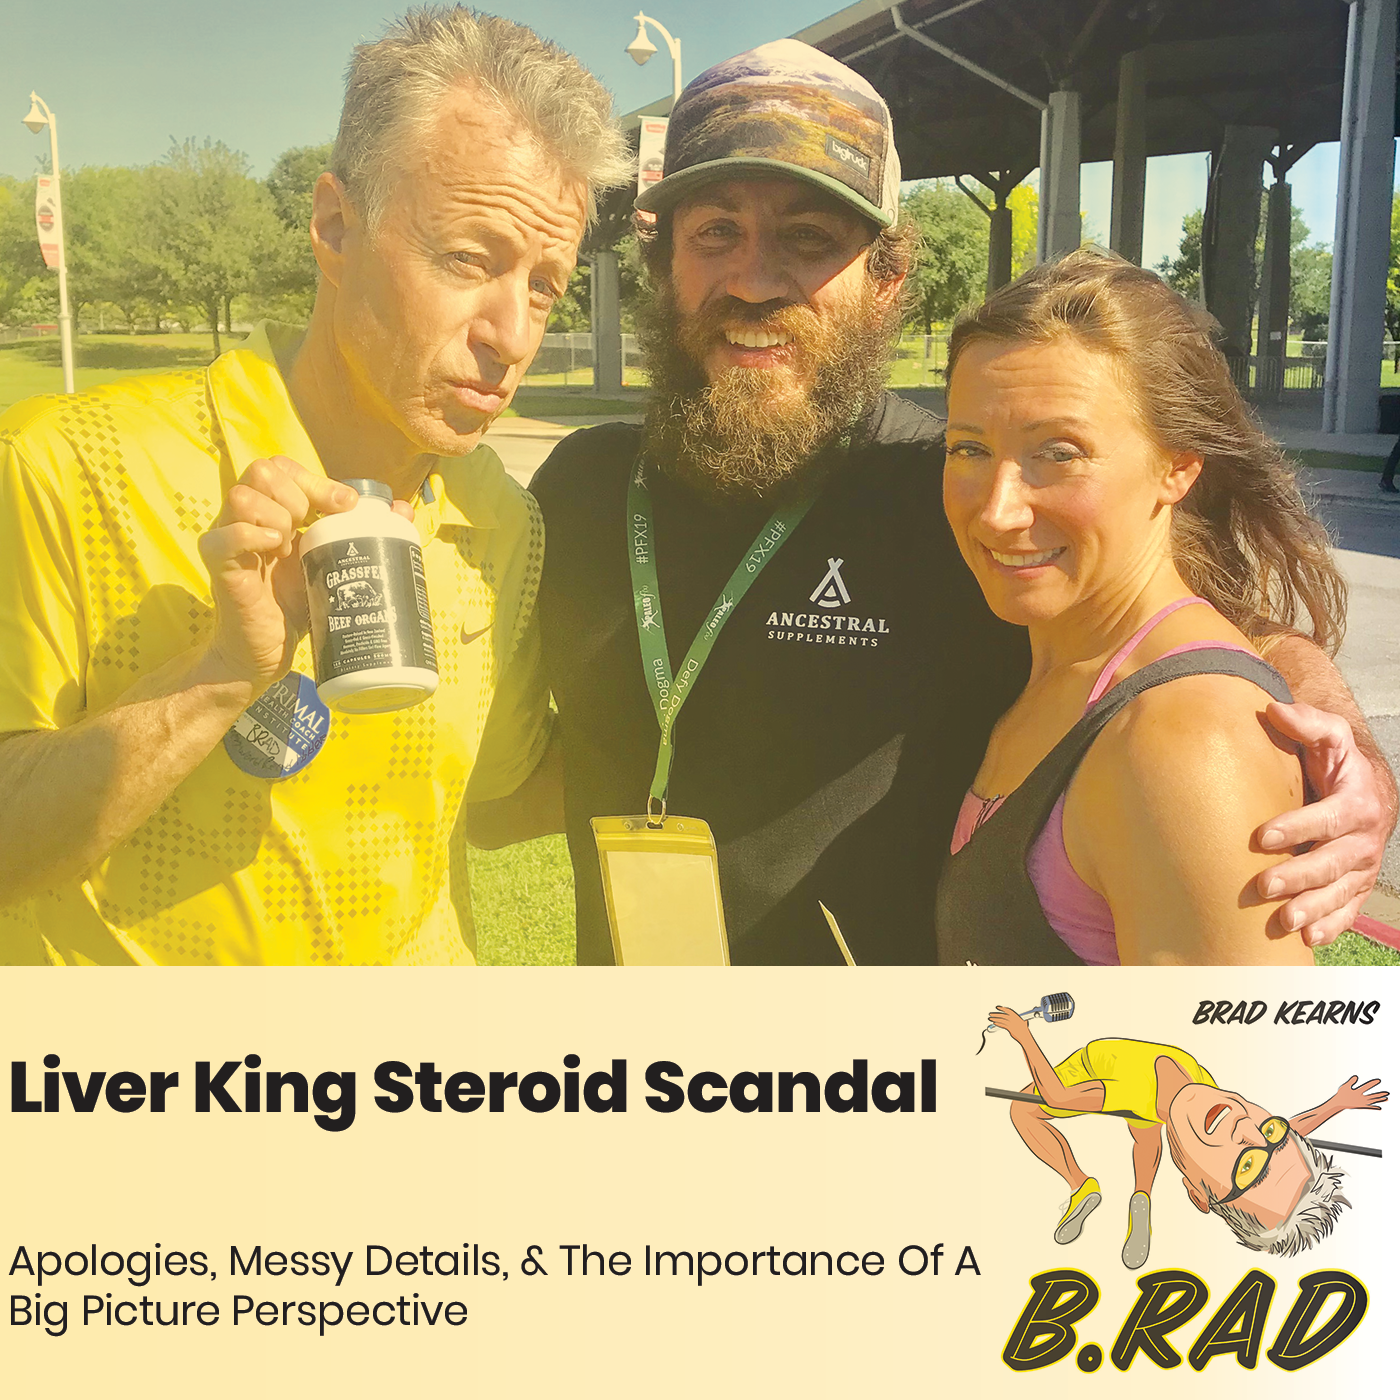 Liver King Steroid Scandal: Apologies, Messy Details, & The Importance Of A Big Picture Perspective